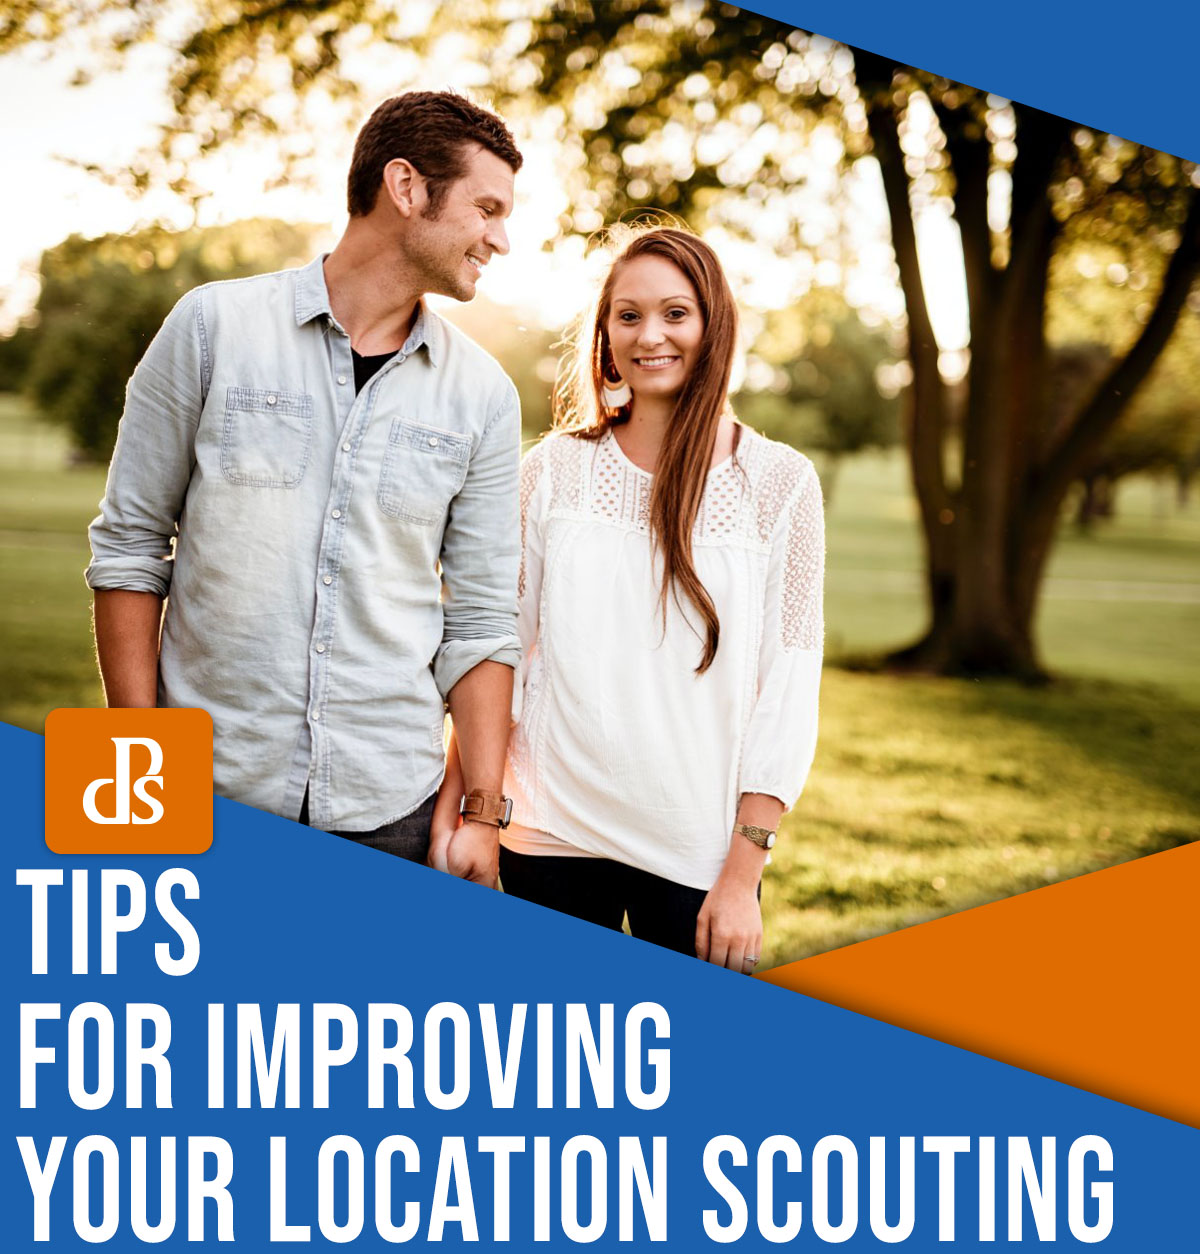 Tips for improving your location scouting